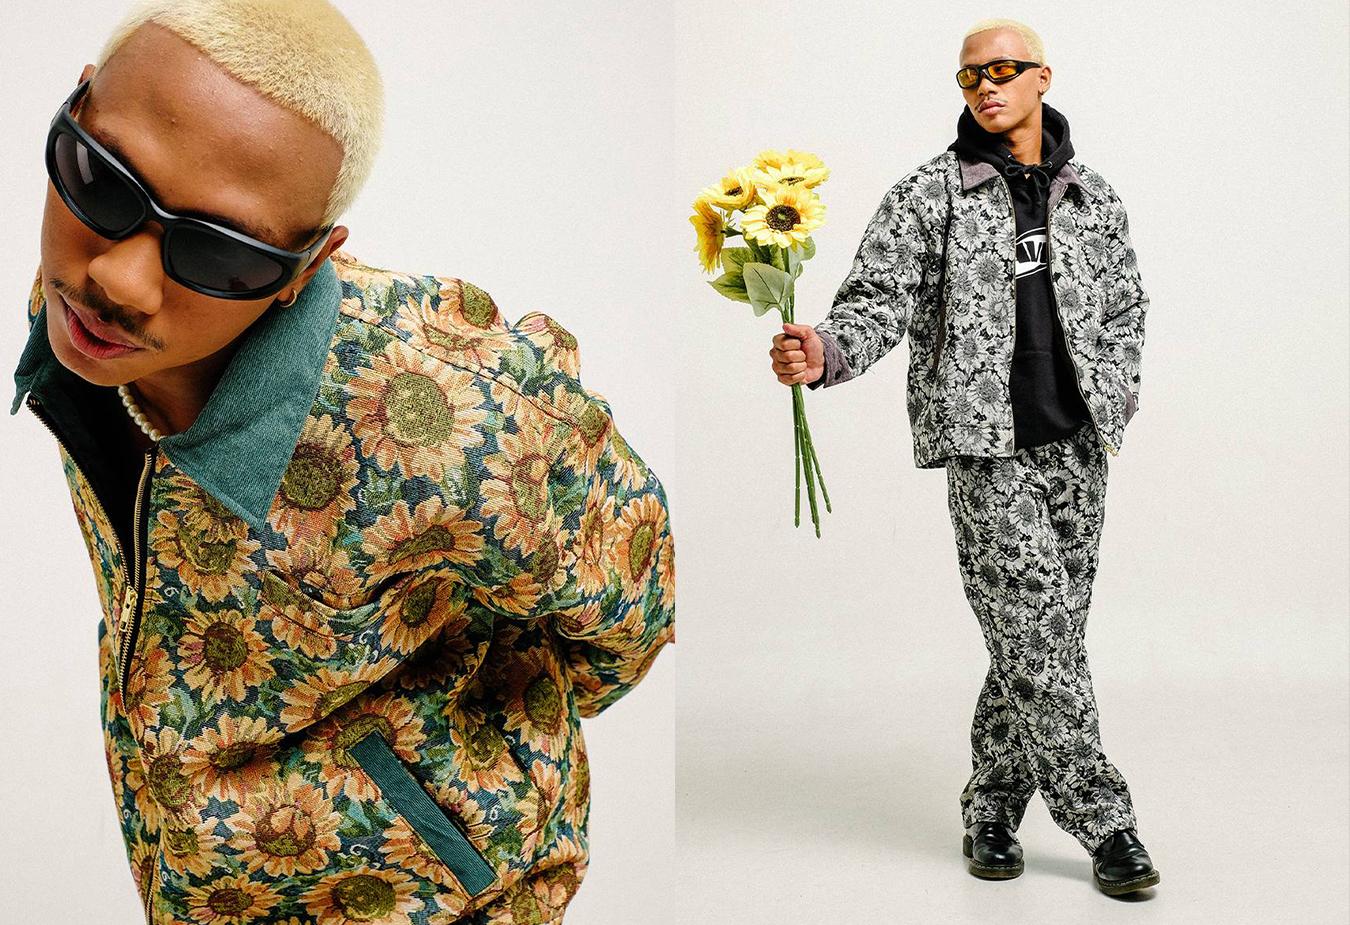 Havoc Drops Its Charming Flowery Goods in "Flower Power" F/W'22